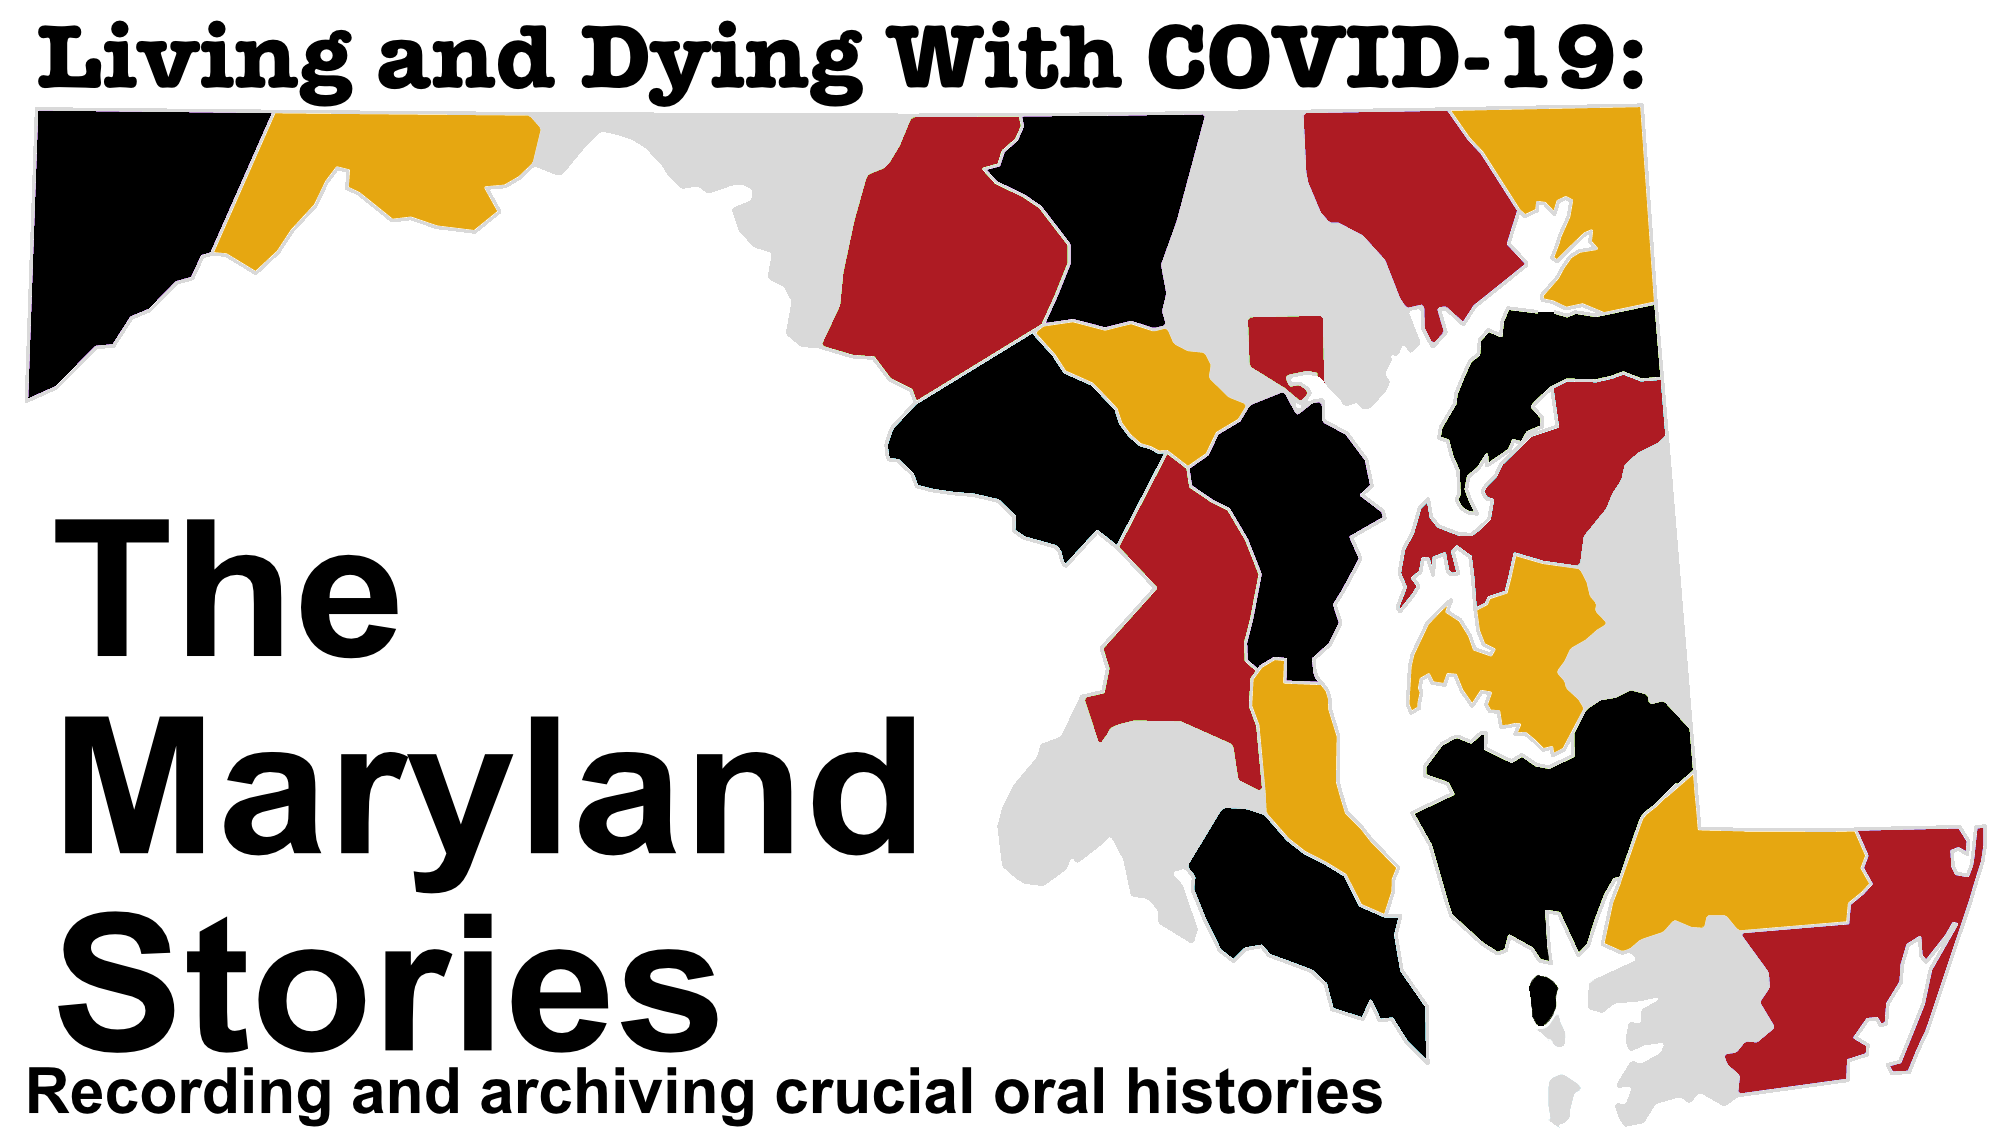 An image of Maryland with the counties colored in yellow, black, grey, and red is on a white background. Above the state is the text "Living and dying with COVID-19." Beneath the state is the text "The Maryland Stories. Recording and archiving crucial oral histories.